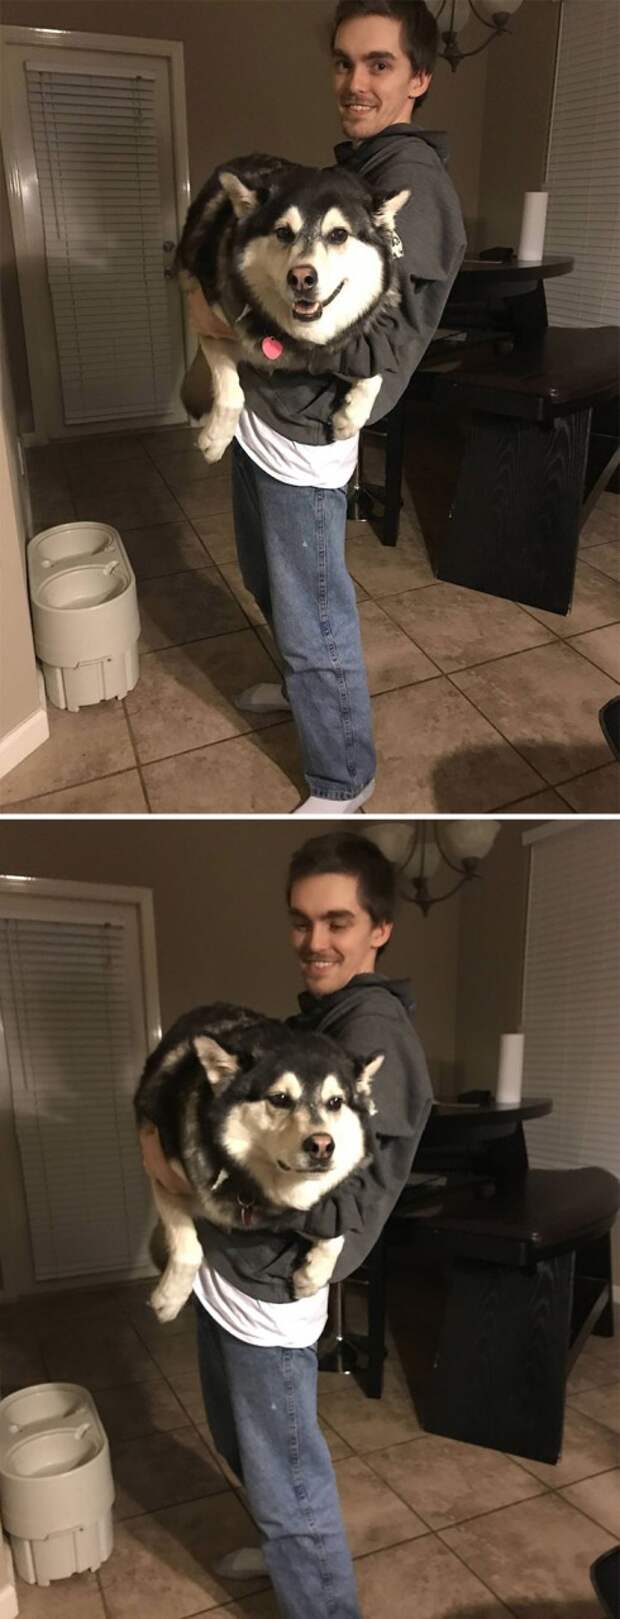 My Friend’s Husky Before And After We Called Him Fat